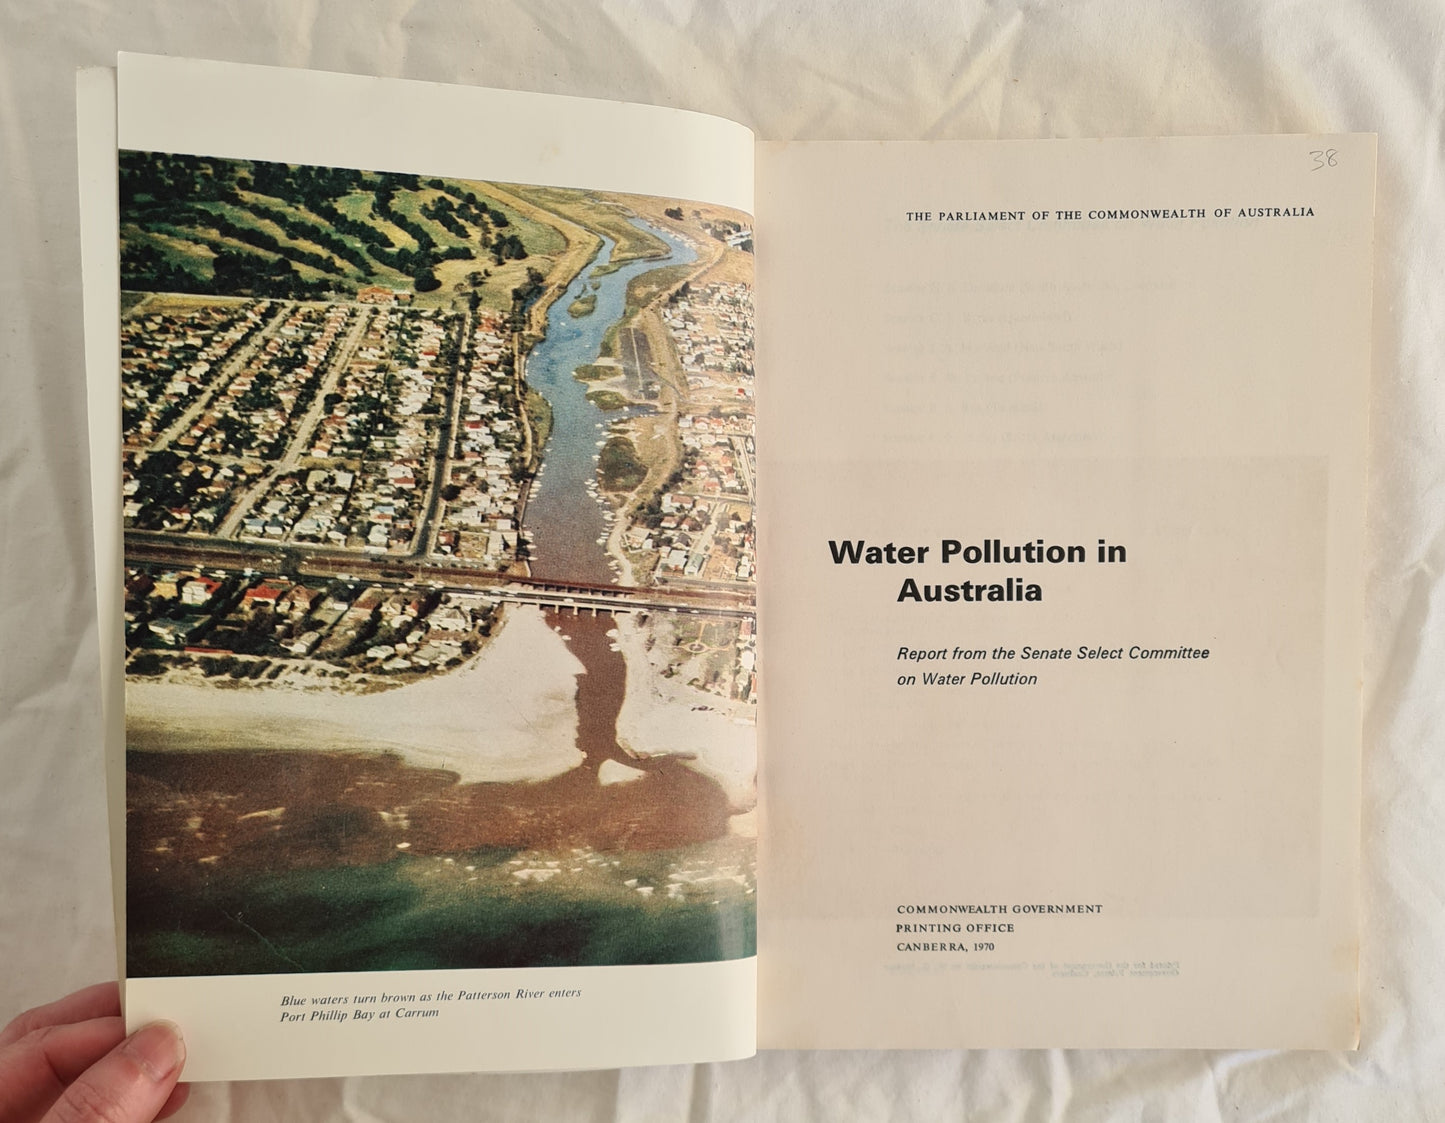 Water pollution in Australia by The Parliament of the Commonwealth of Australia